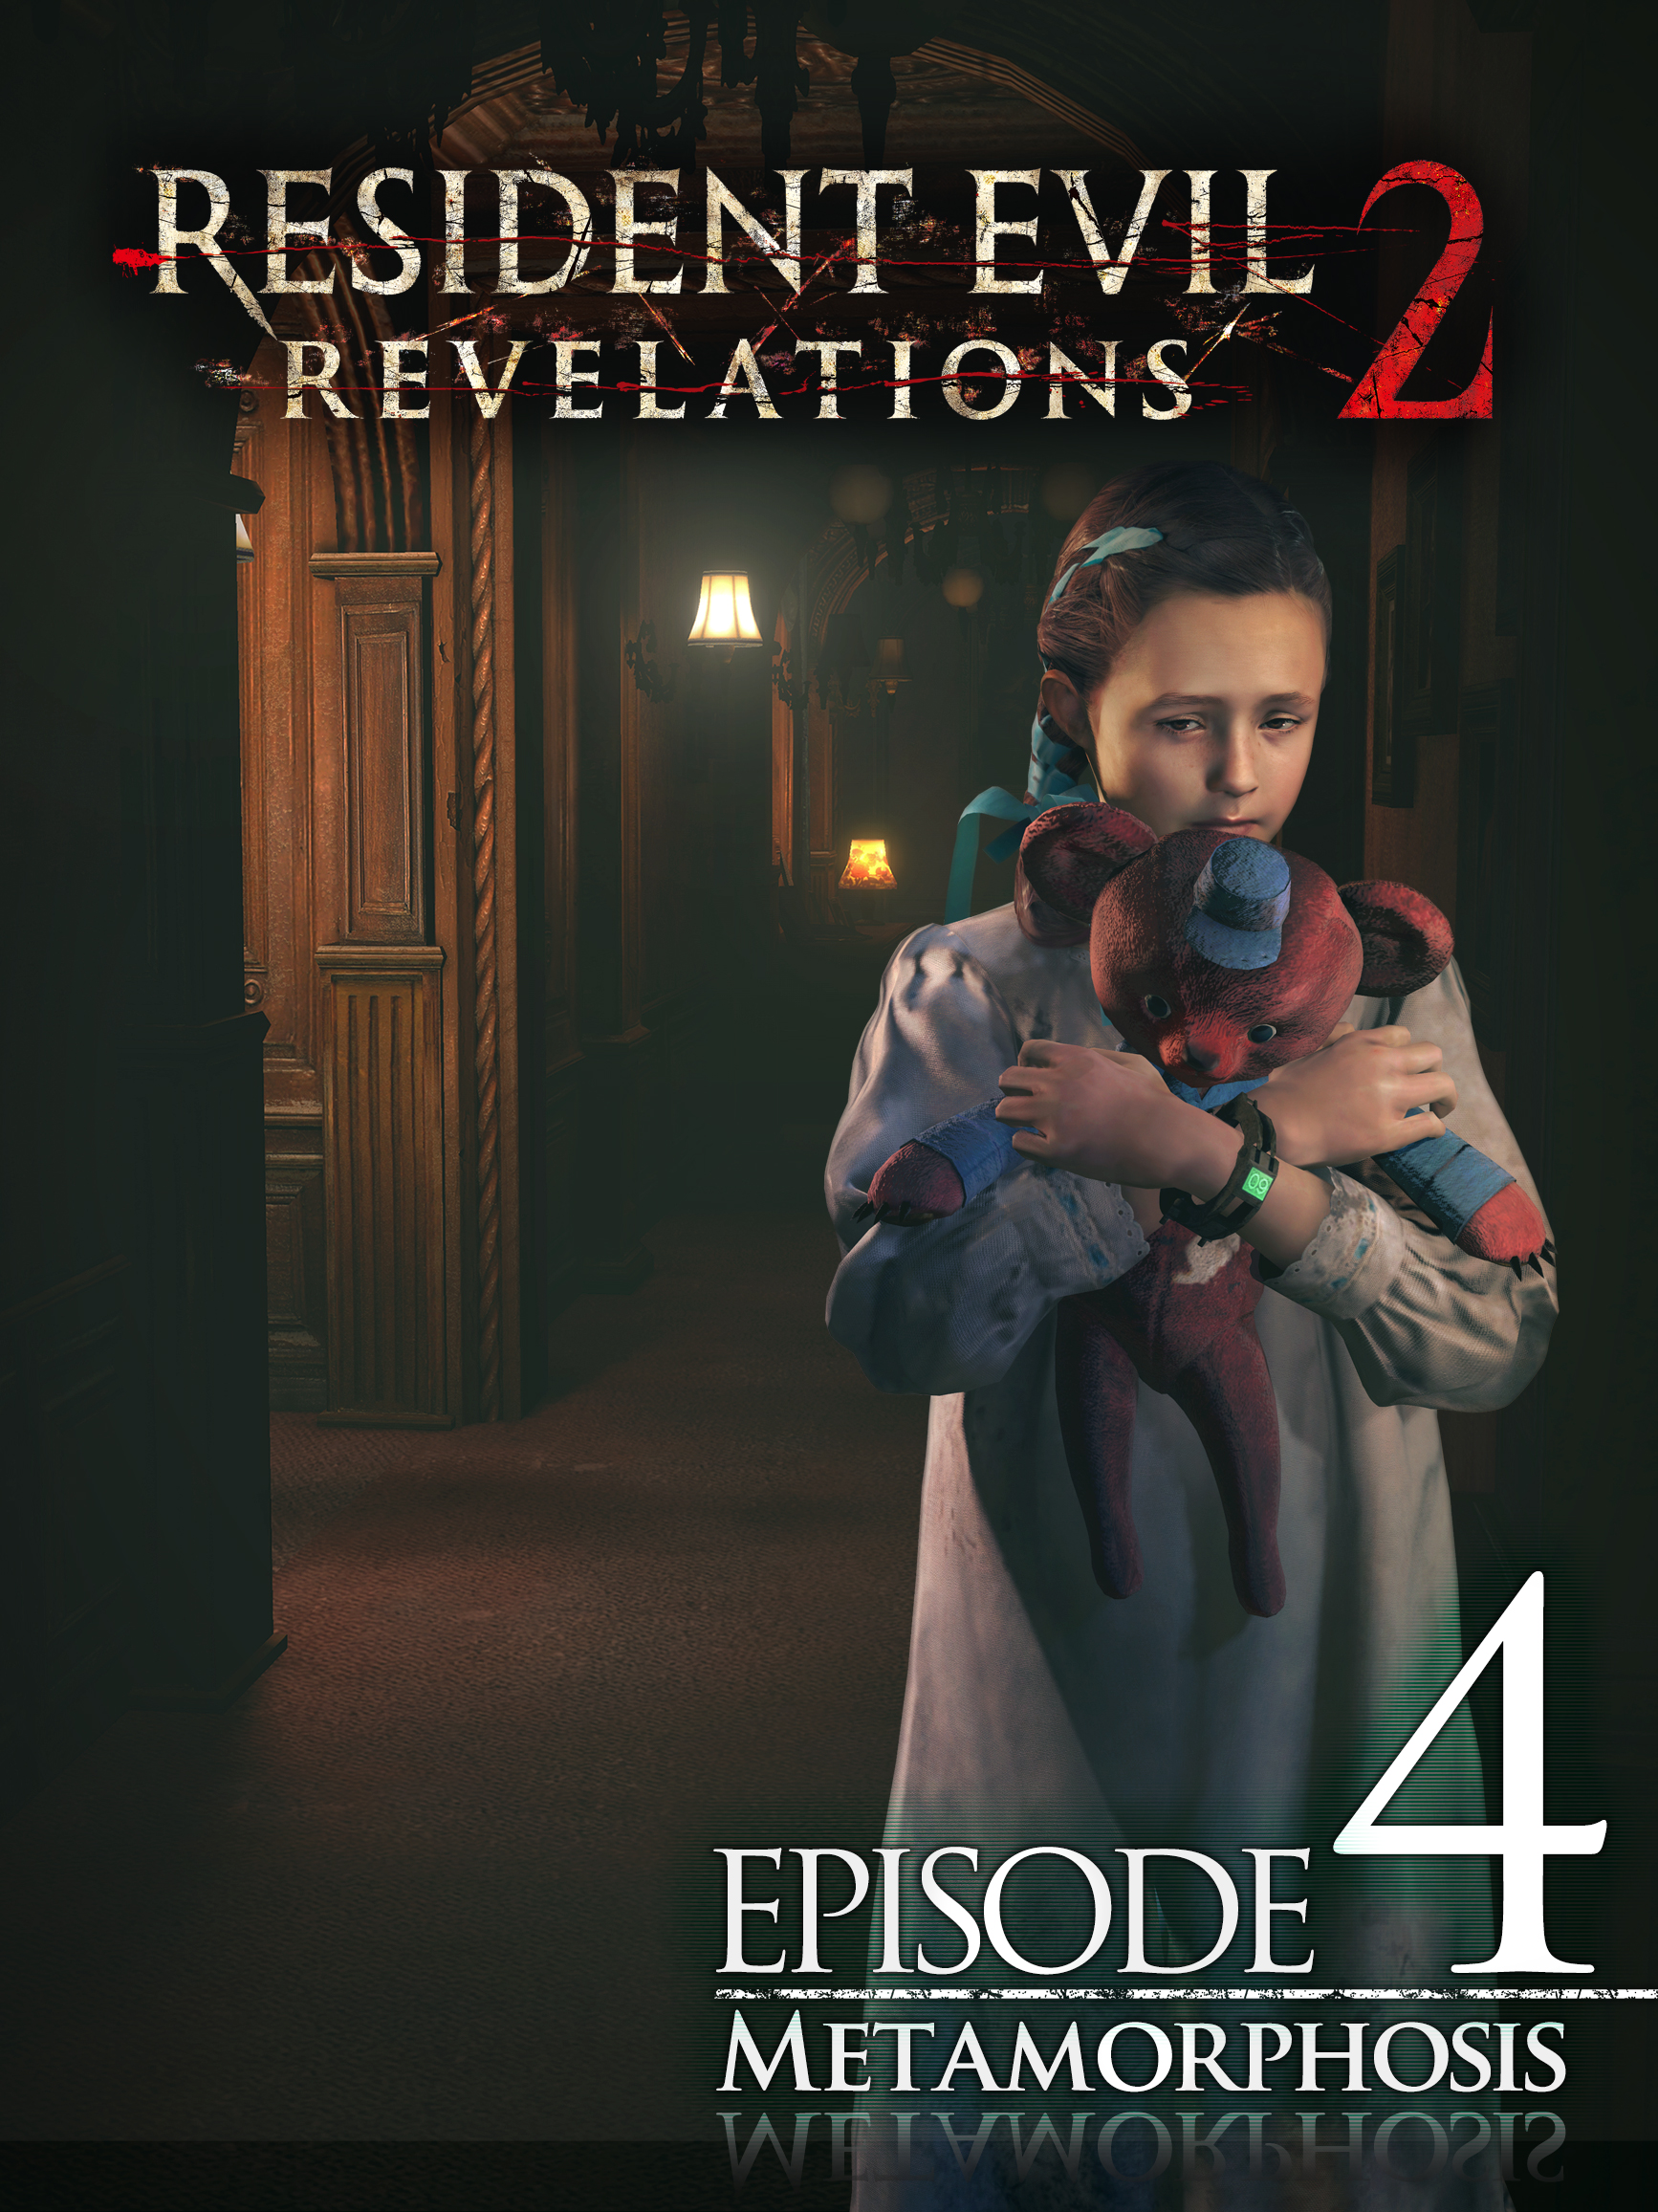 Claire Redfield will be fighting evil in Resi Revelations 2